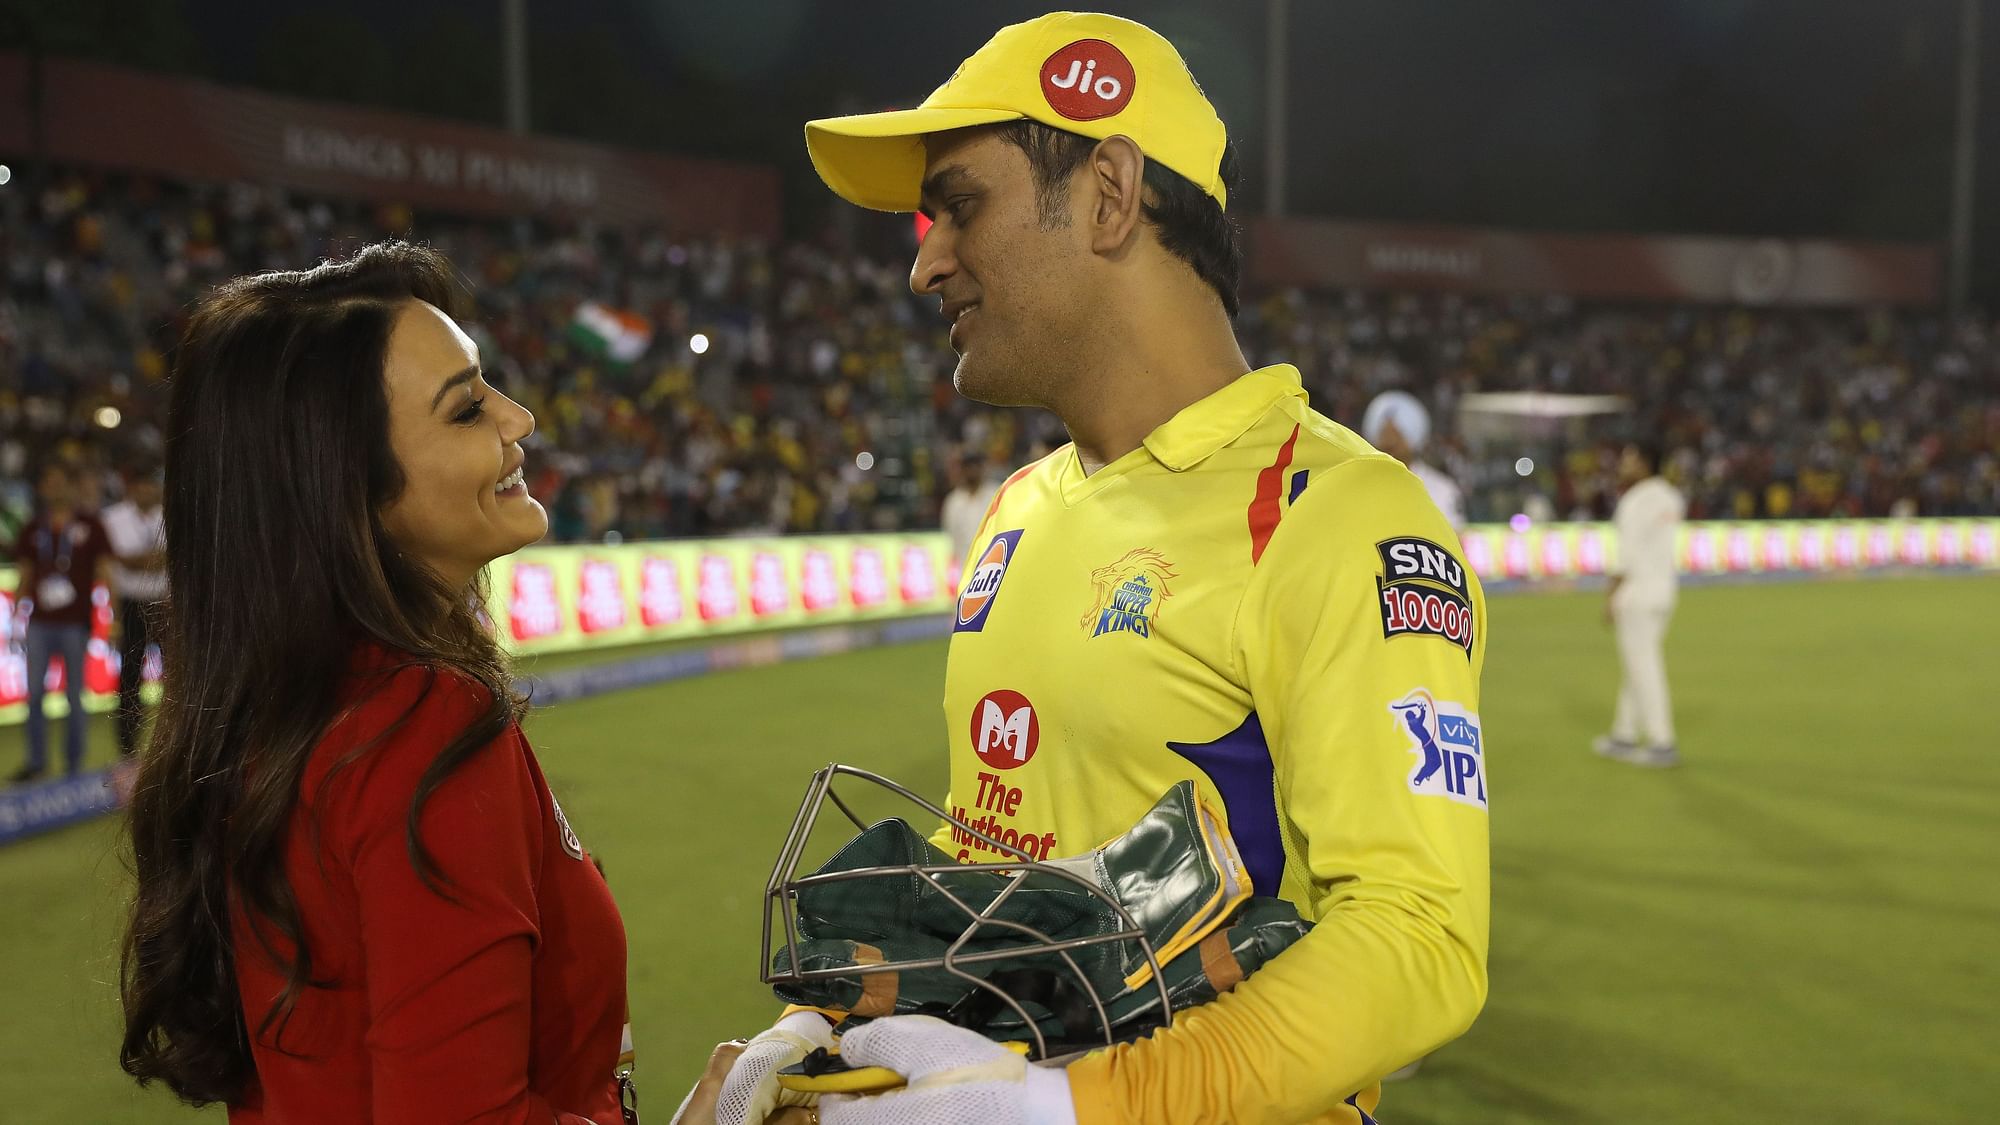 Both KXIP co-owner Preity Zinta and CSK skipper MS Dhoni have been associated with IPL from it’s very beginning in 2008.